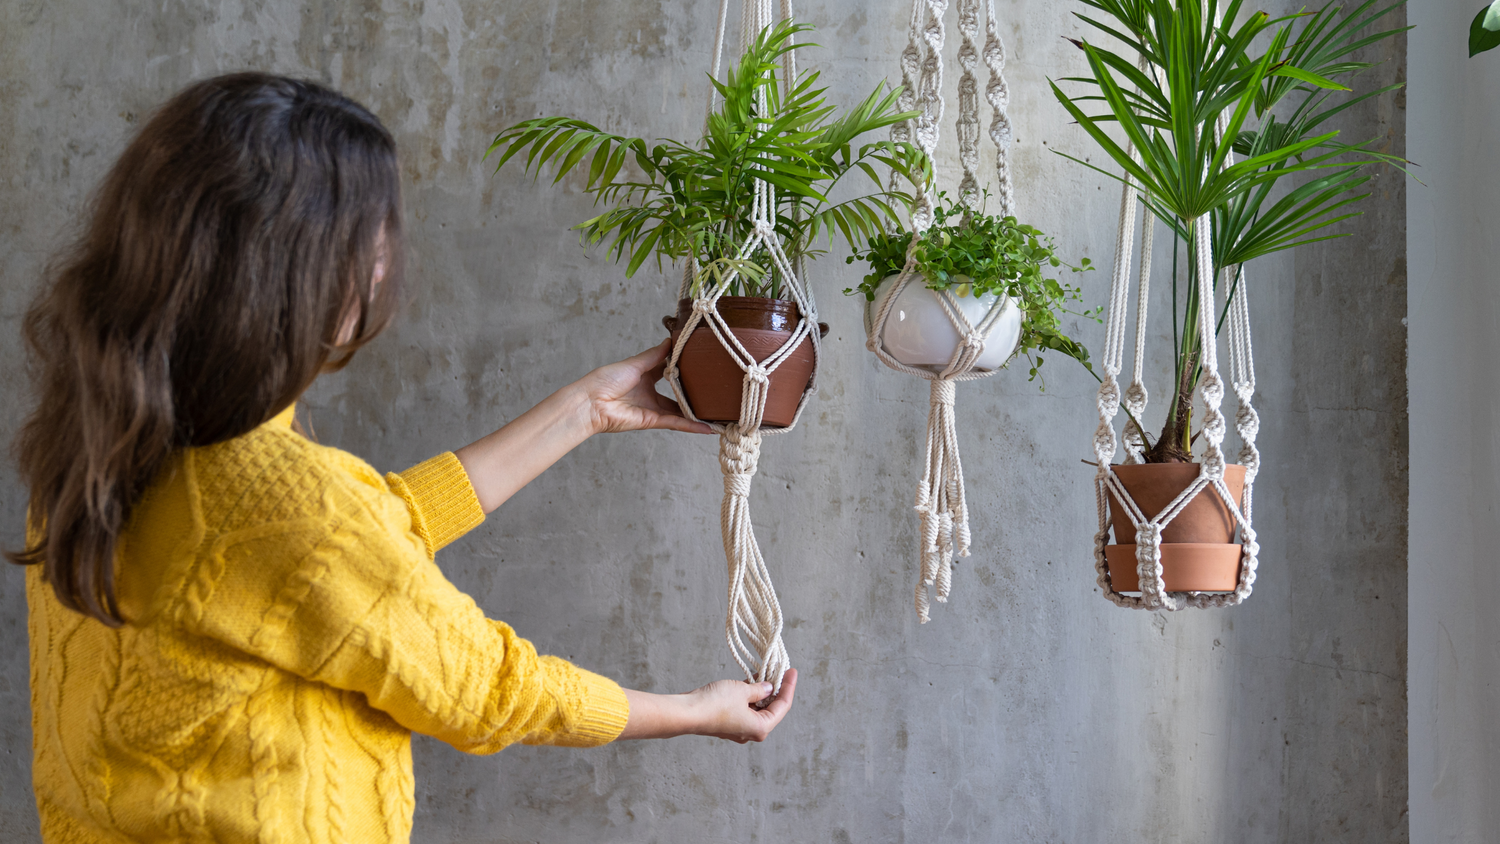 Spring Greenery: Elevate Your UK Home With Hanging Indoor Plants